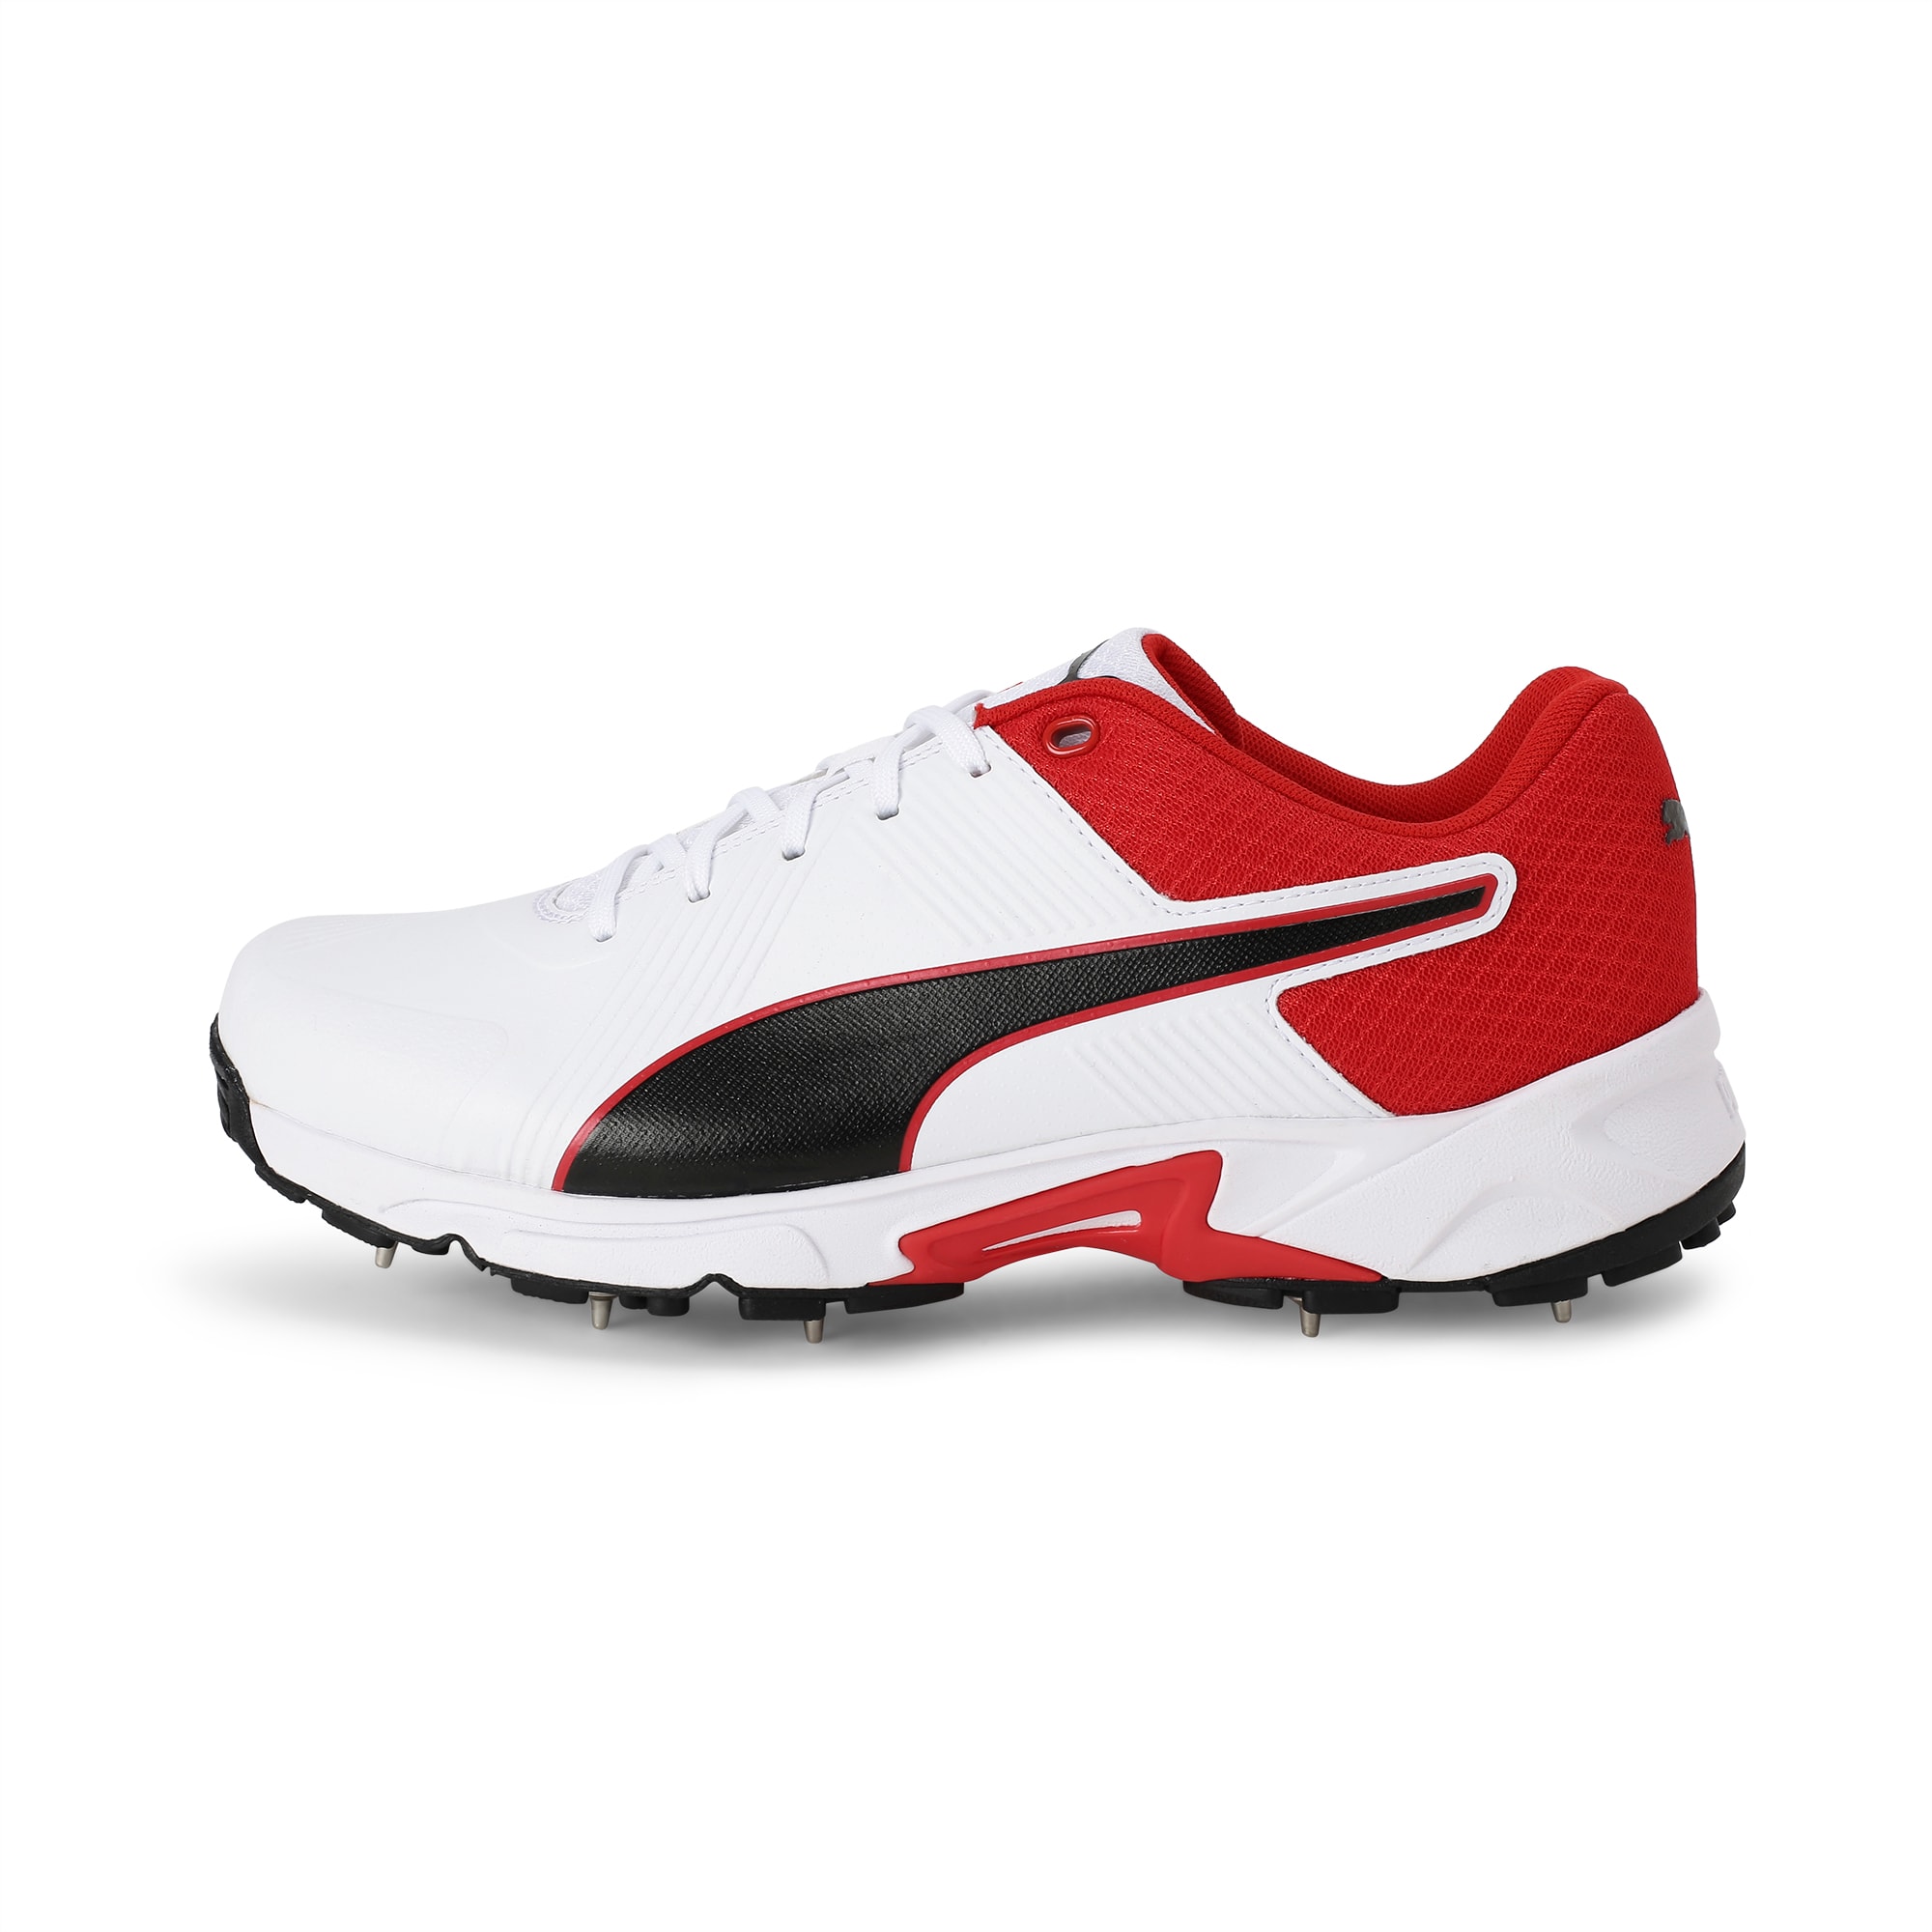 puma spikes running shoes